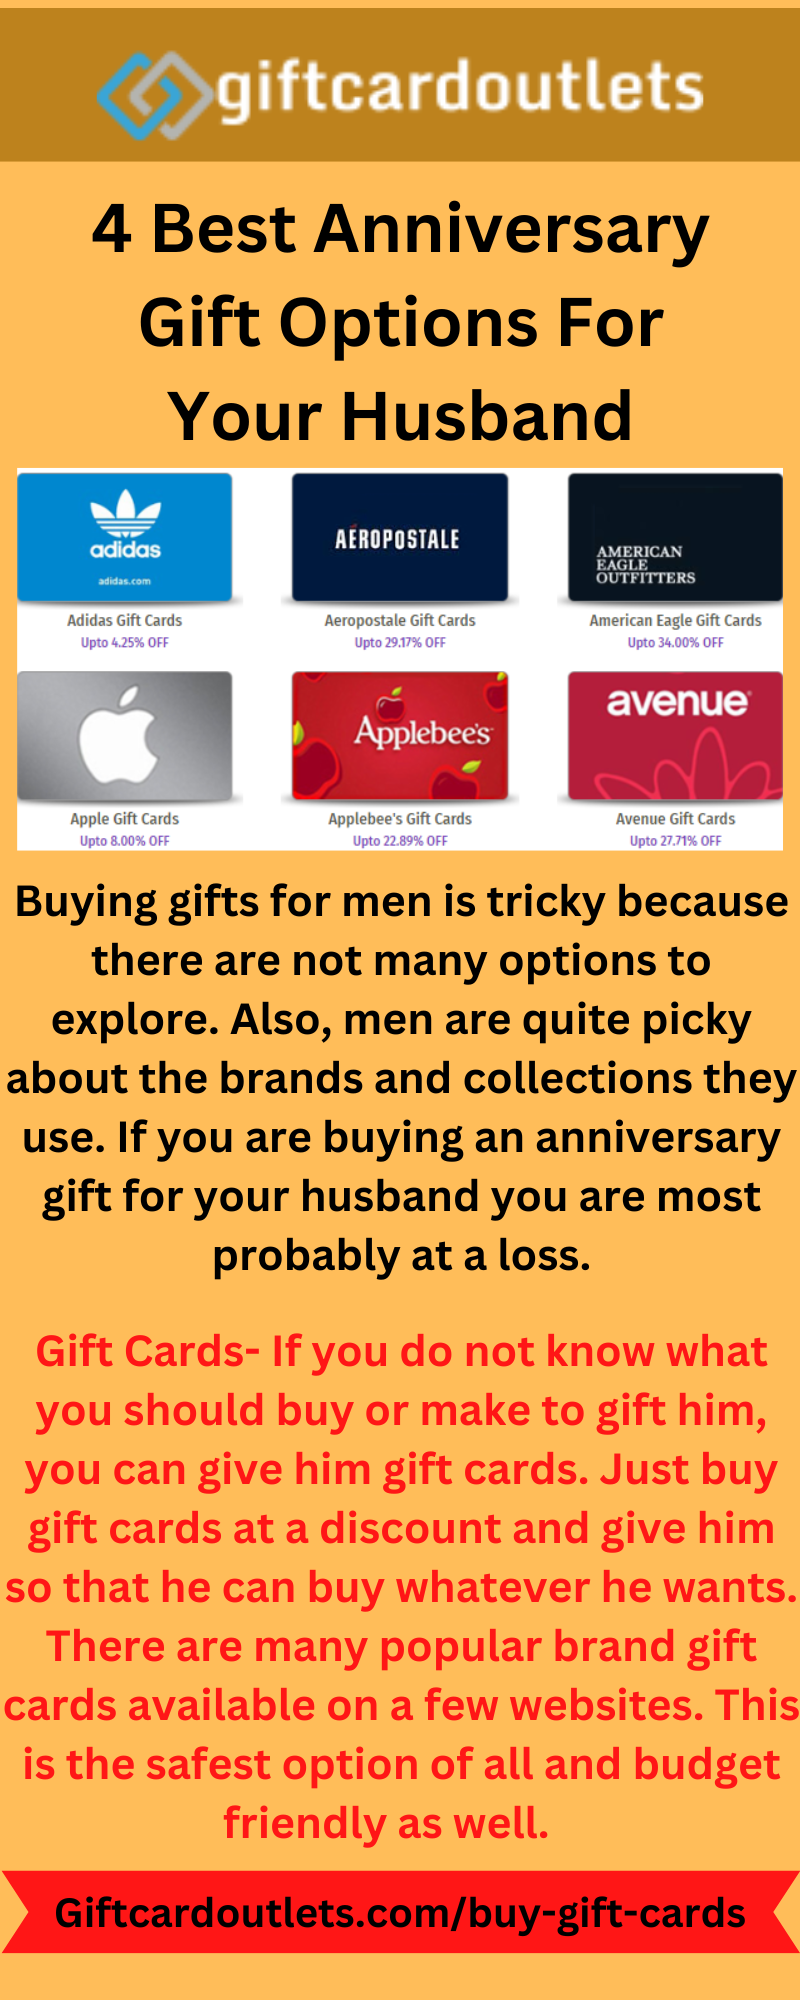 4 Best Anniversary Gift Options For Your Husband